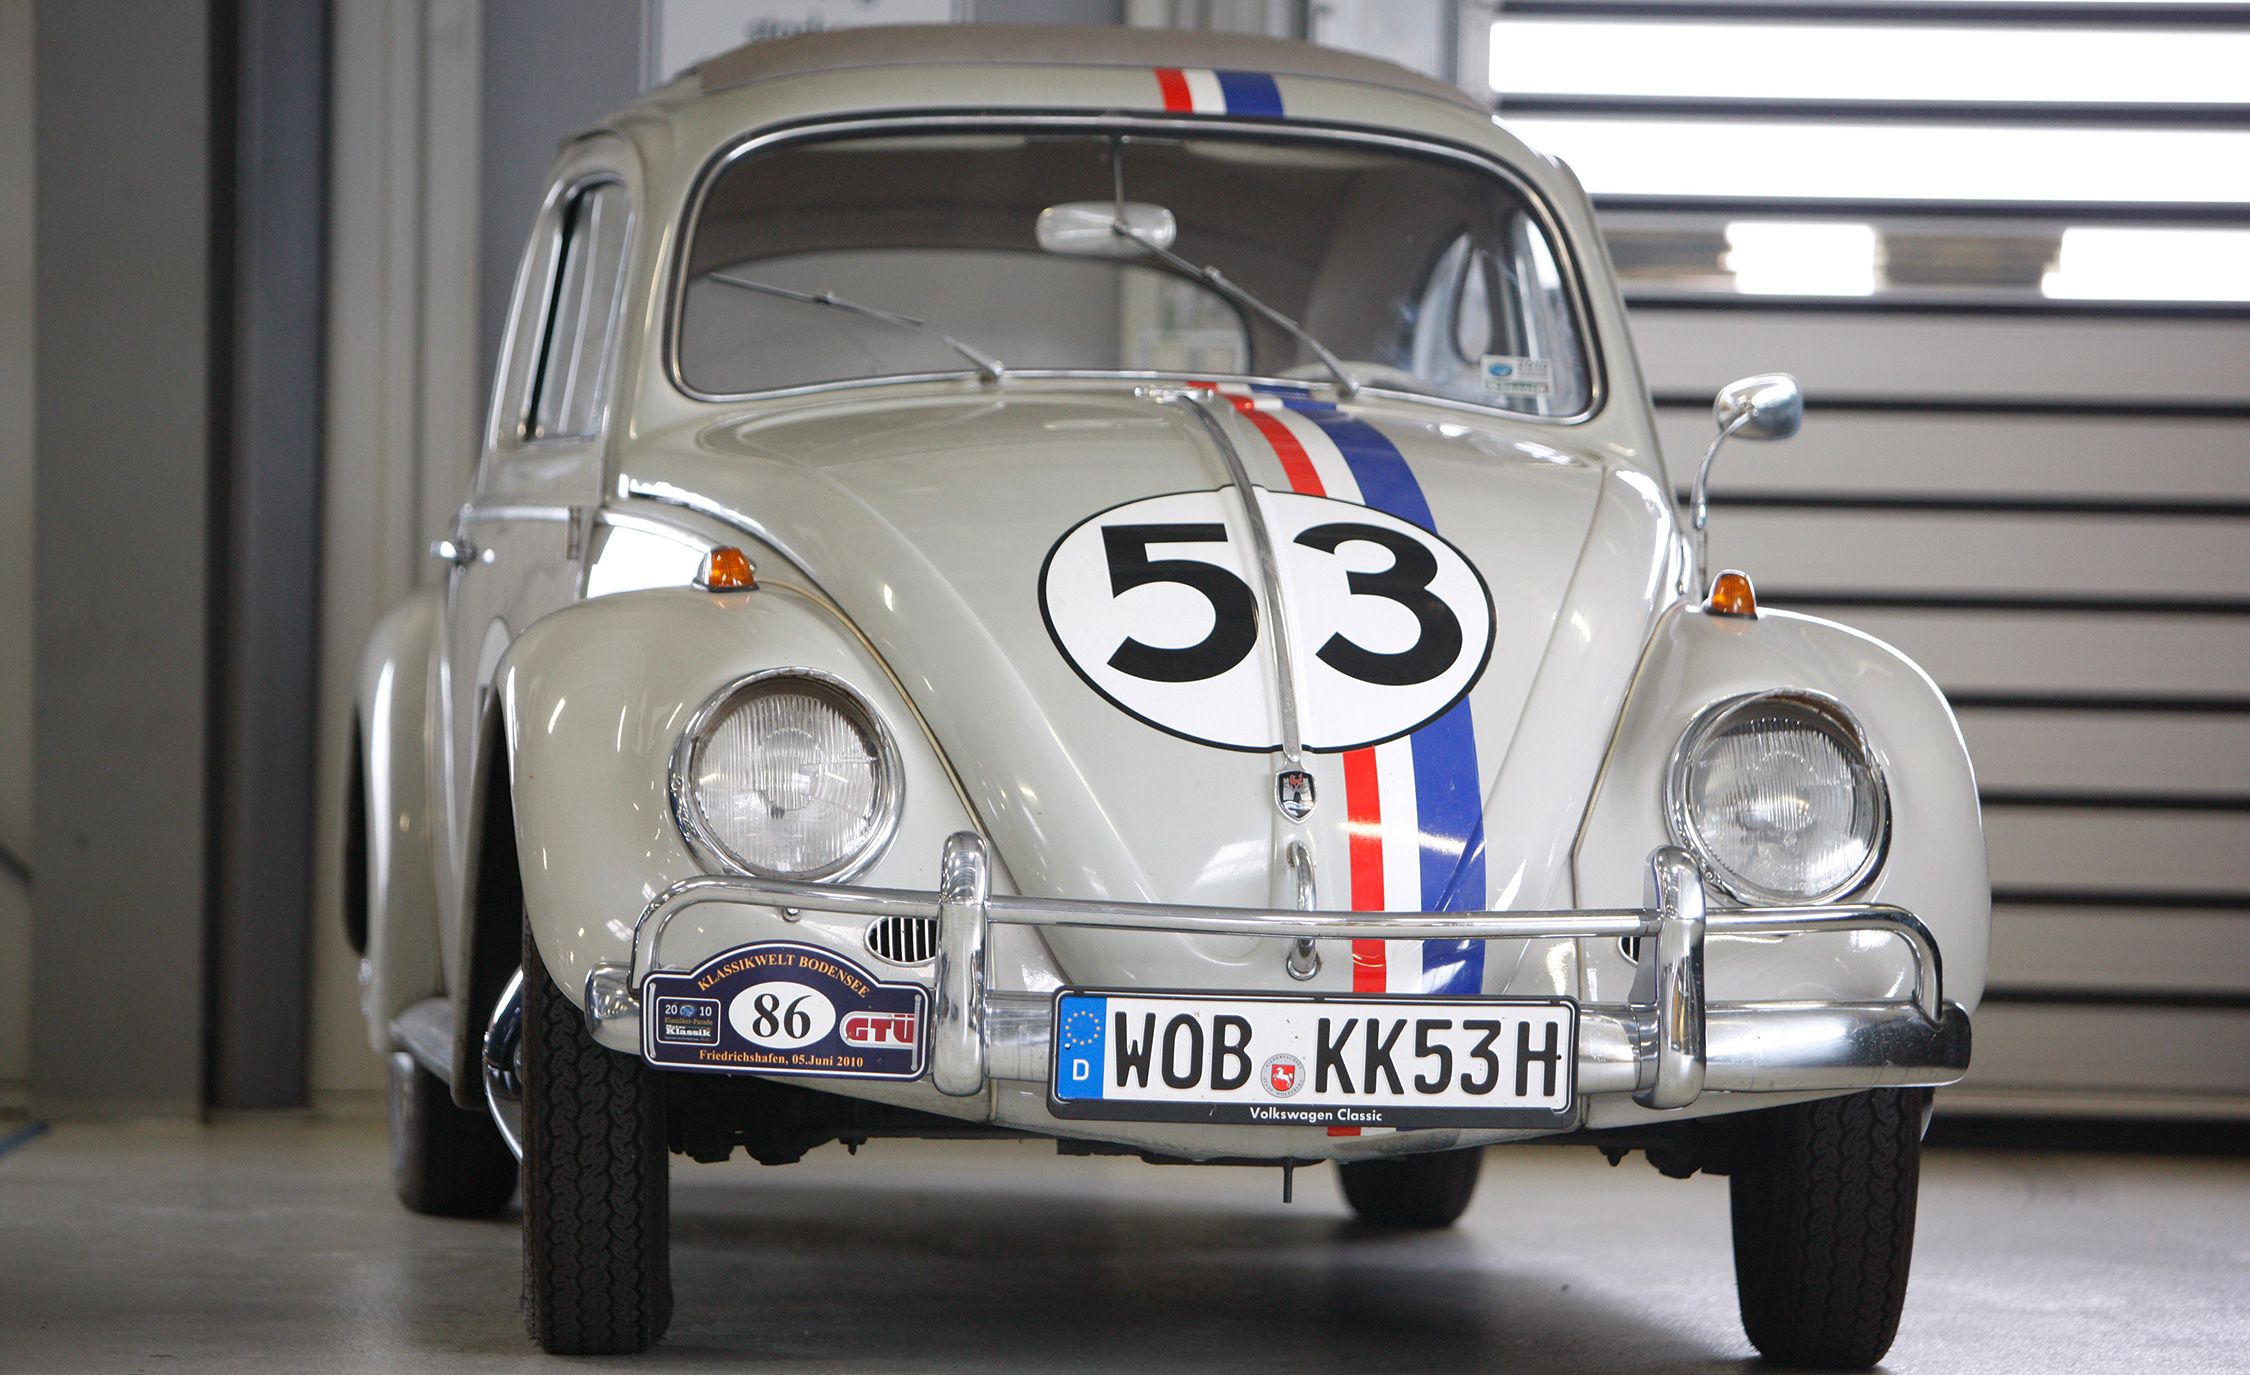 Entry point classic VW Beetle remains easiest first collector car